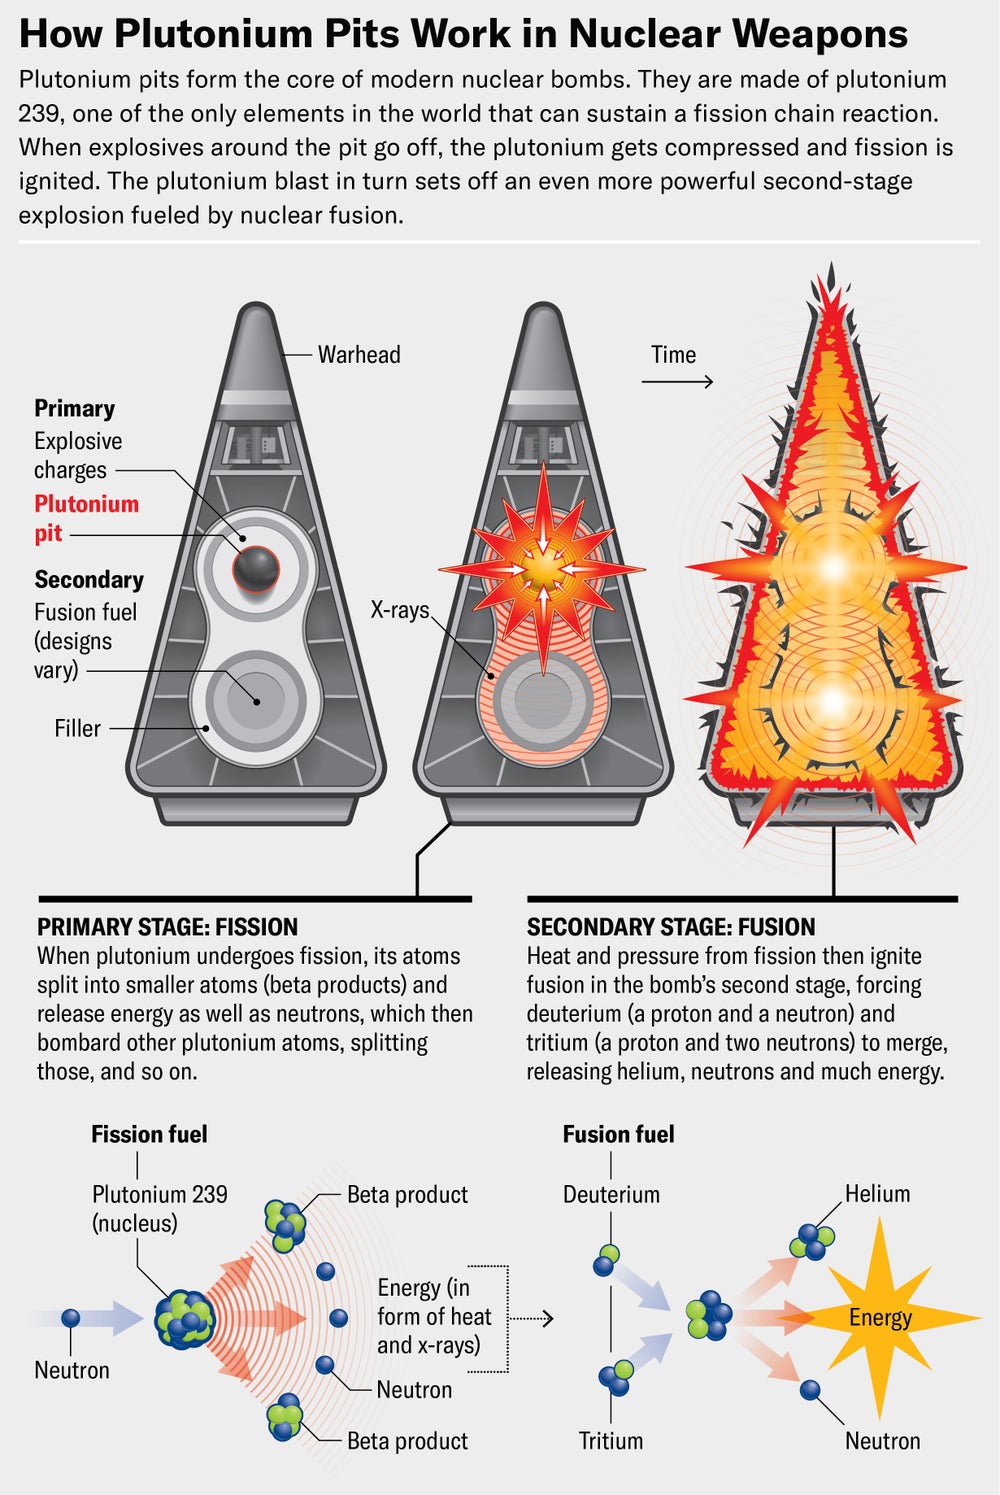 A graphic shows how a plutonium pit in a nuclear weapon causes an explosion in two phases: fission, then fusion.